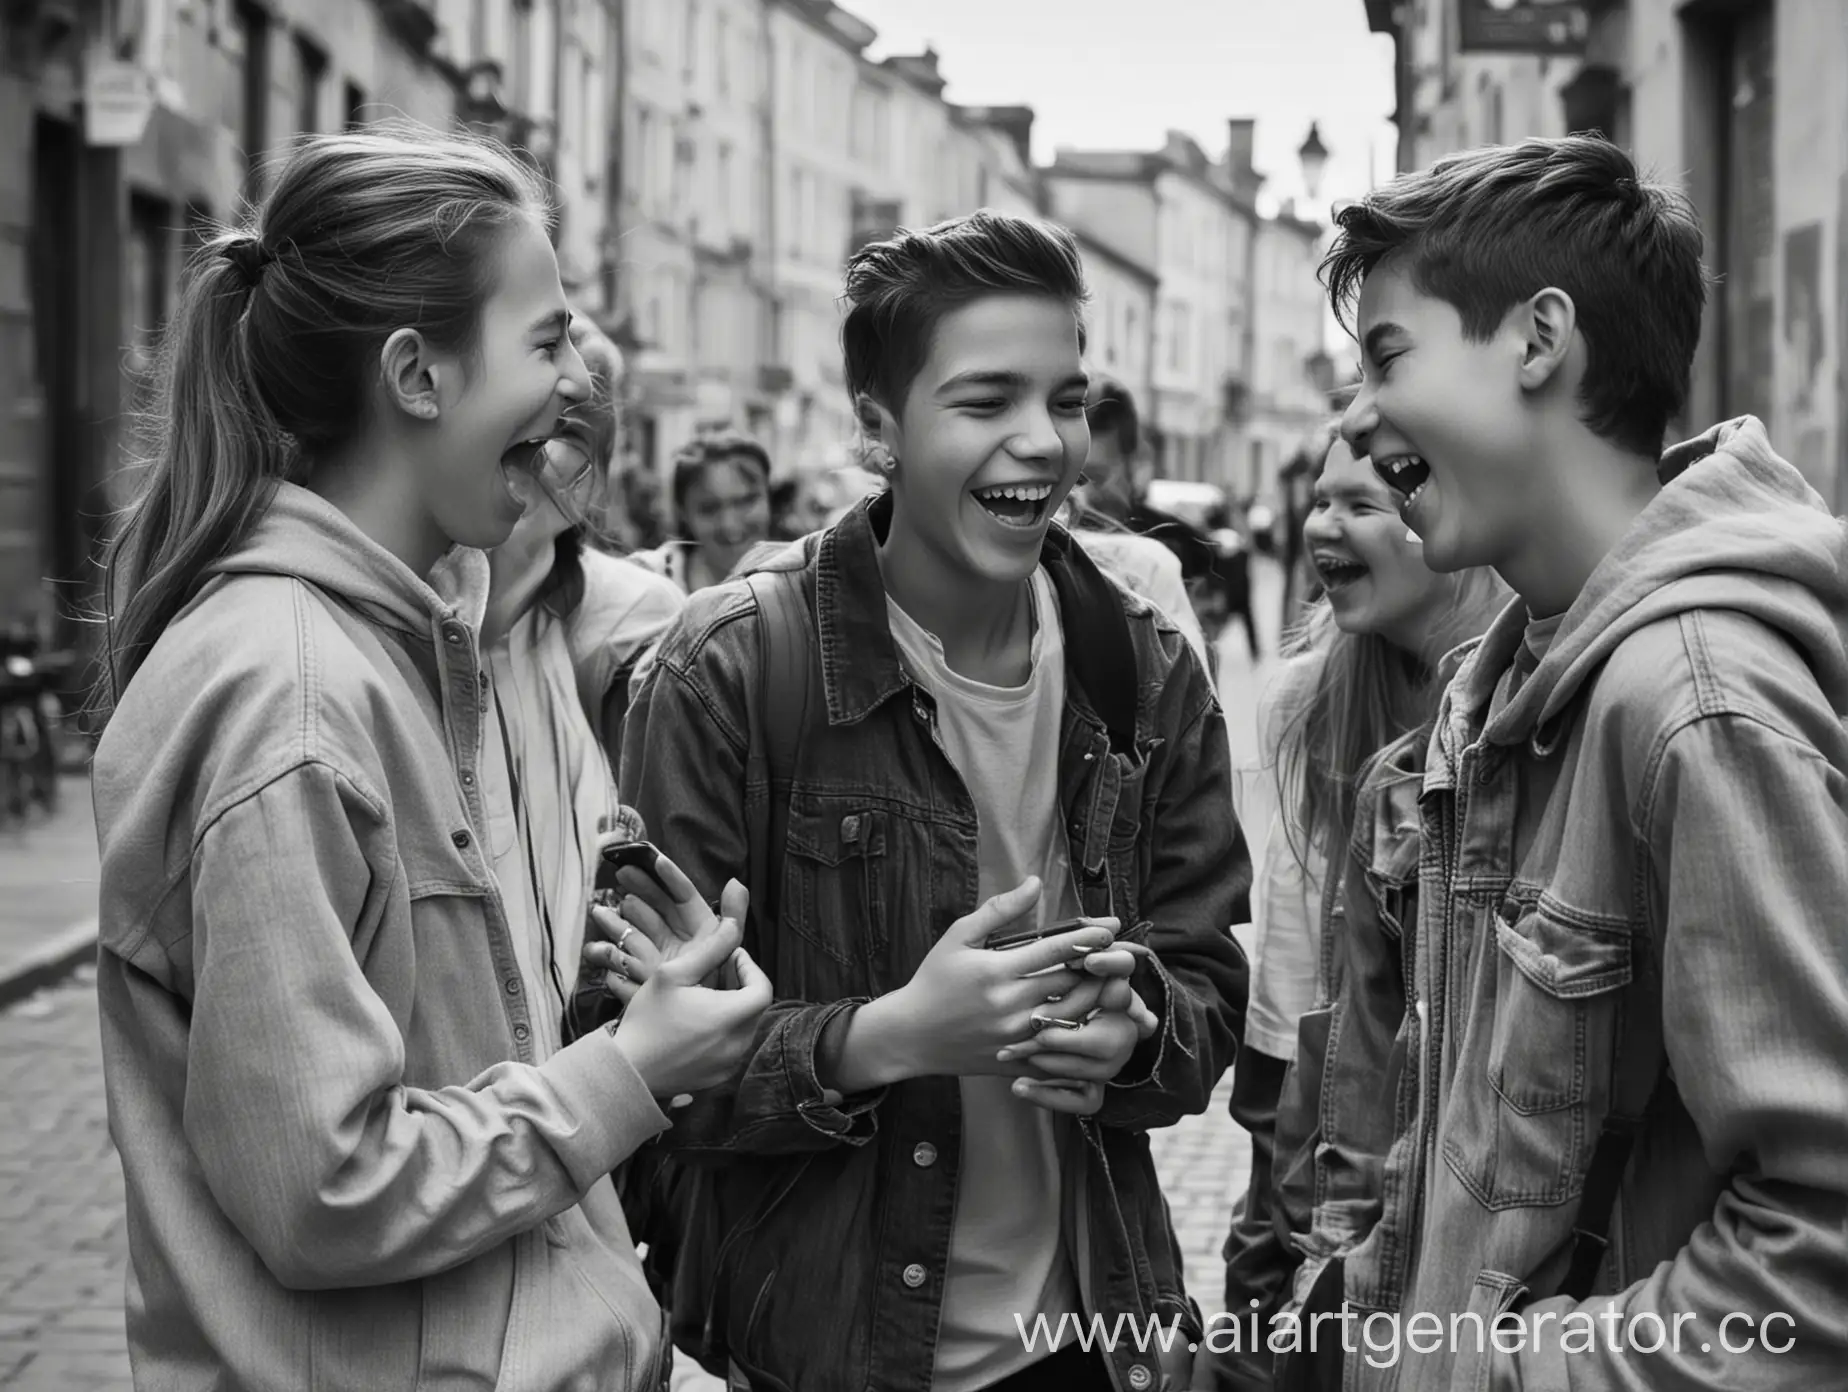 Teenagers-Laughing-and-Communicating-on-City-Street